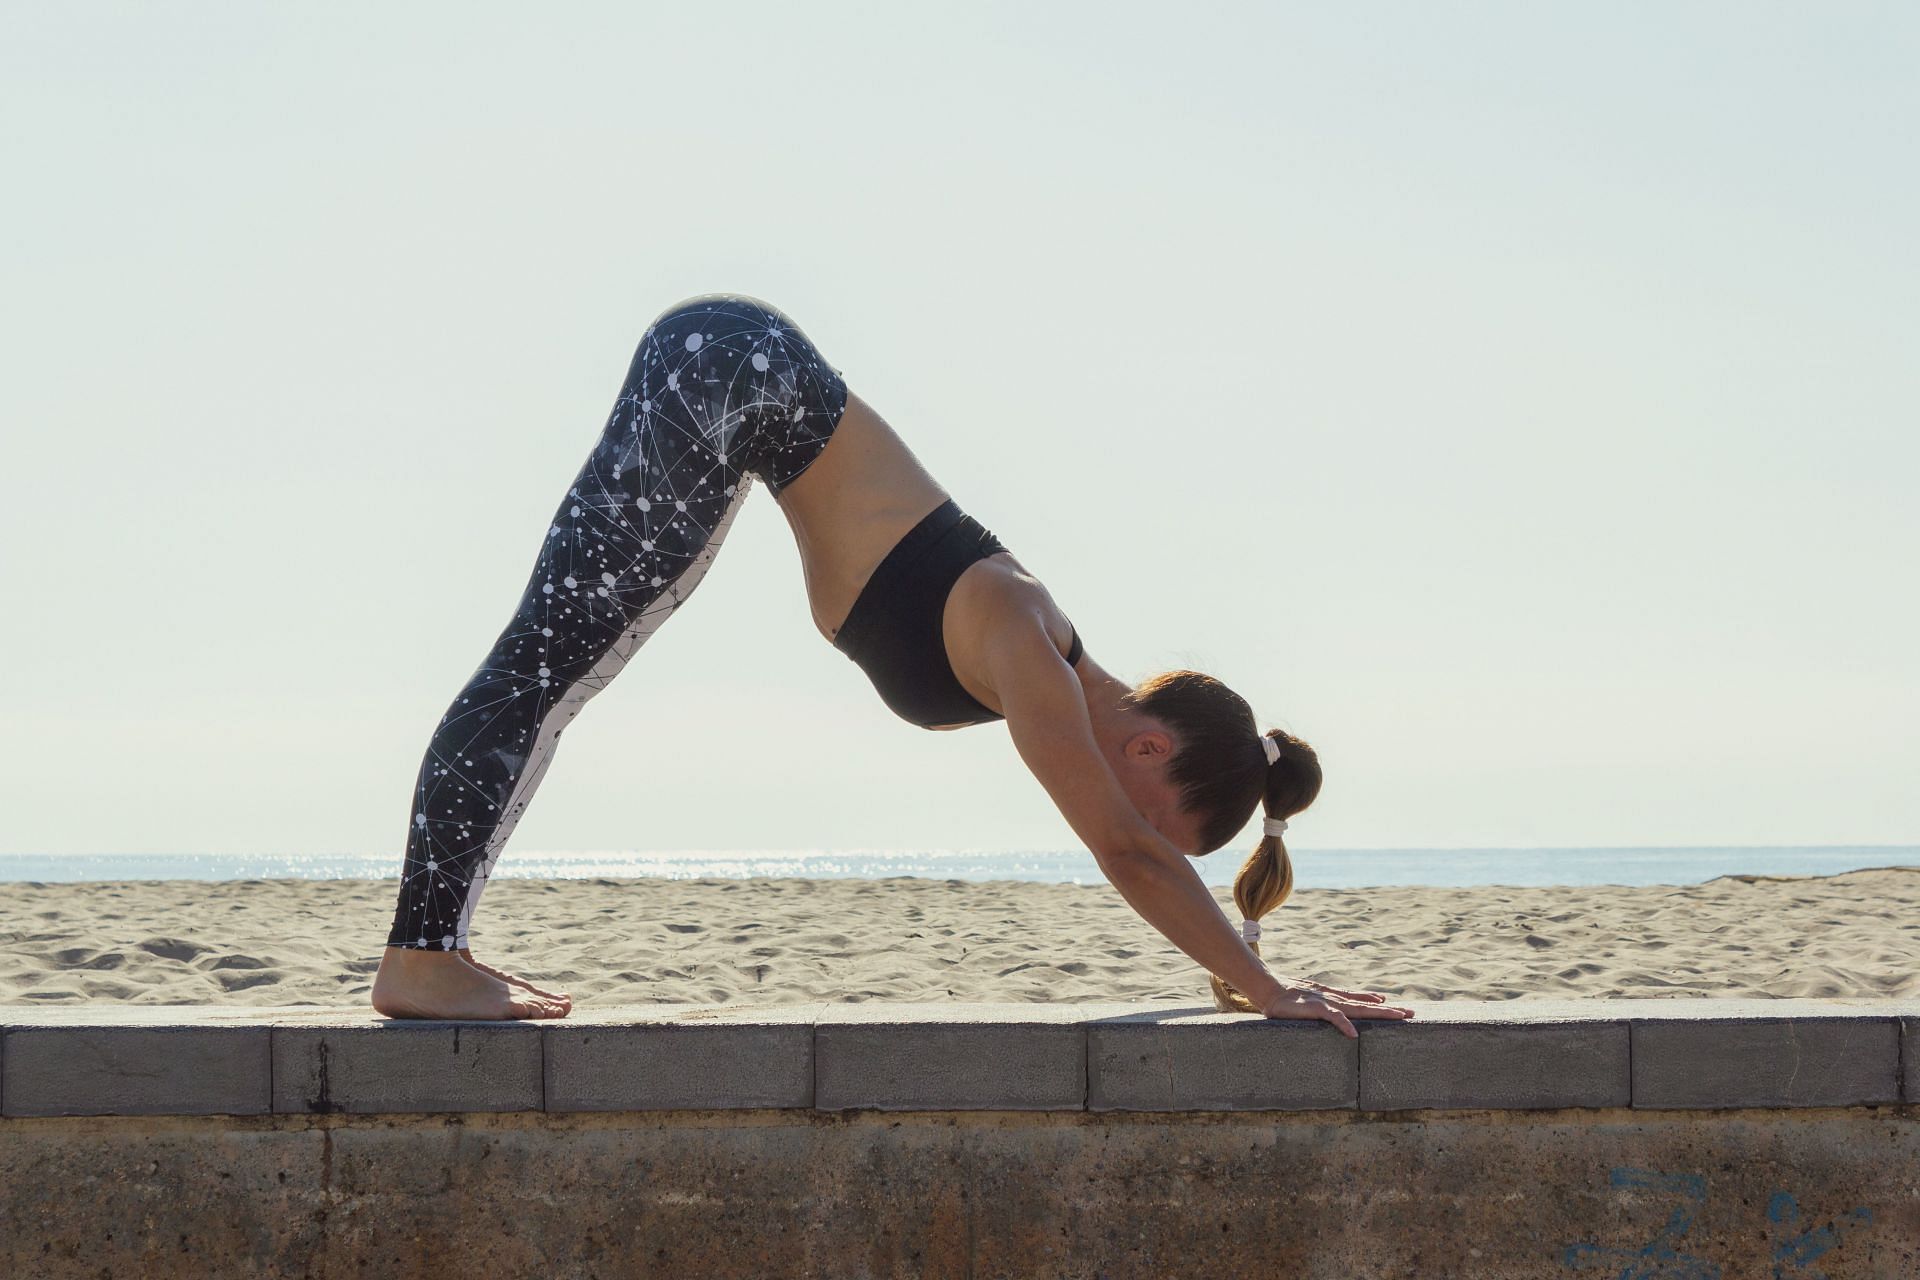 Aggregate 76+ be inspired yoga pants latest - in.eteachers